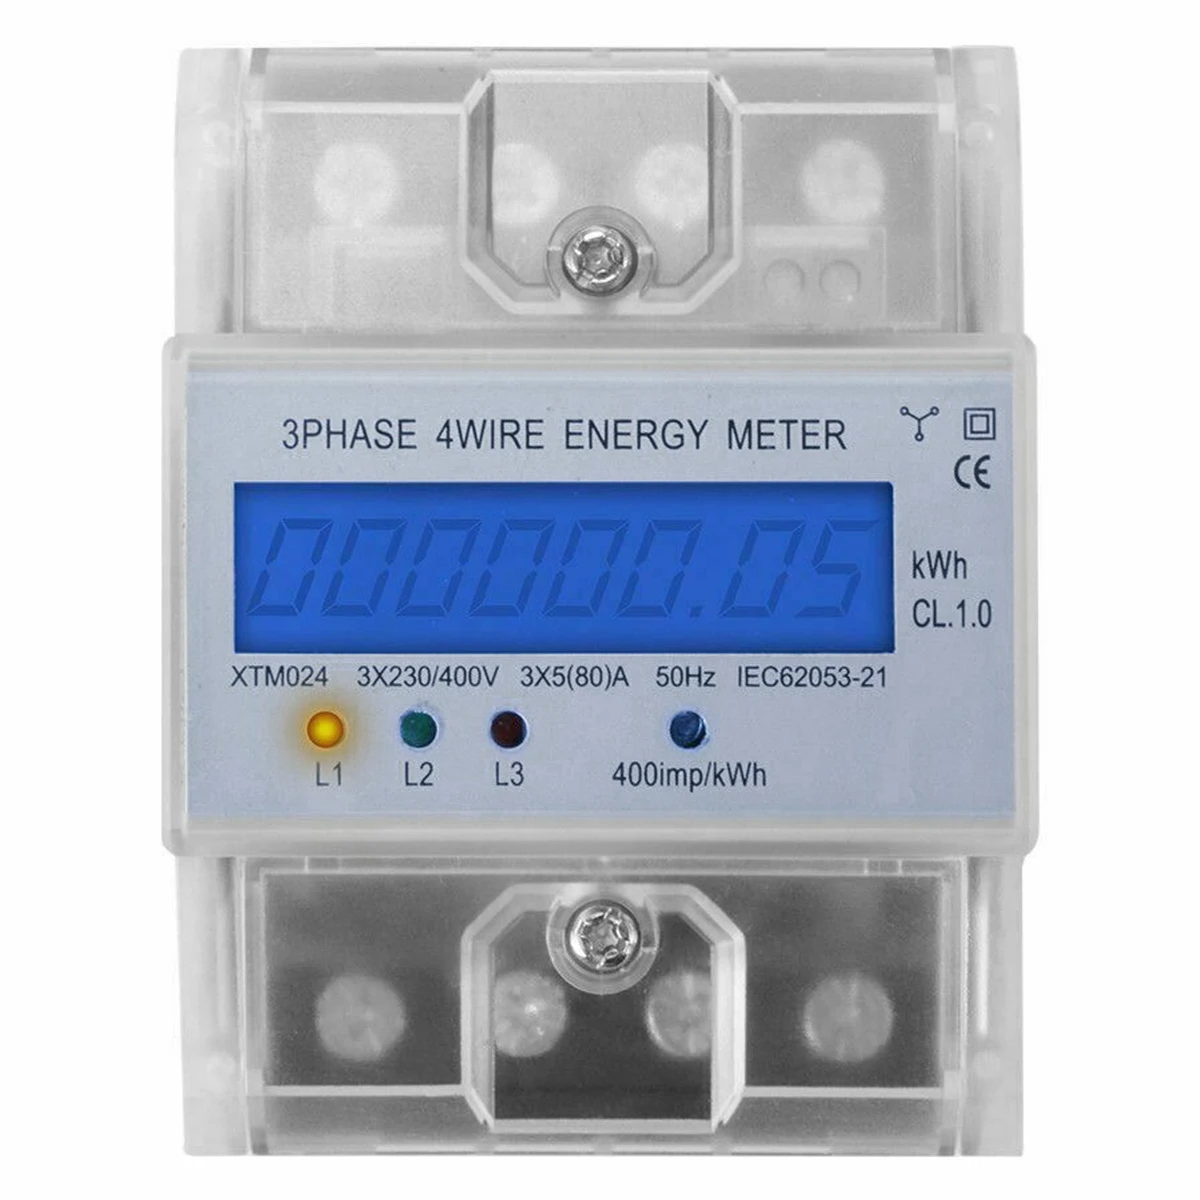 LCD Three-Phase Meter 3 Phase 4-Wire Energy Meter Digital Electric Power Meter Precise Stable Ammeter Voltmeter With LCD Display